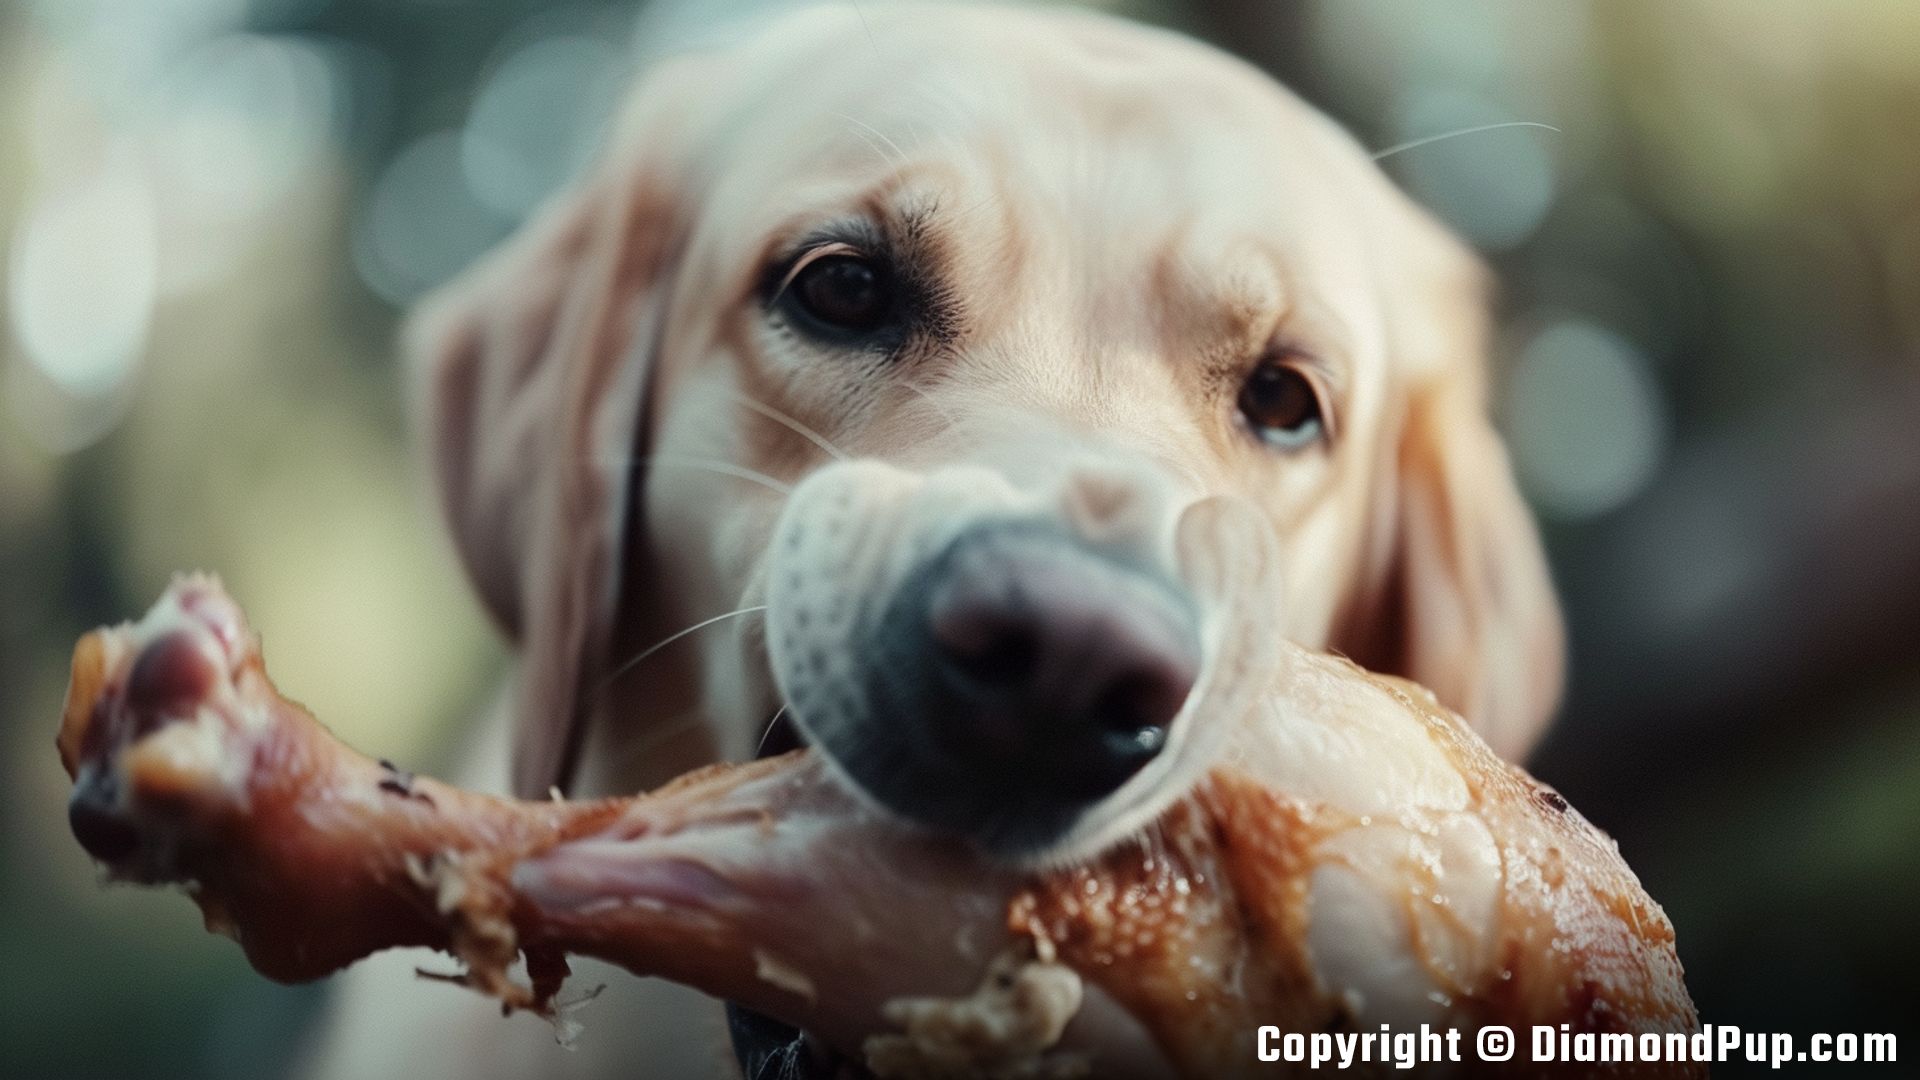 Image of a Cute Labrador Snacking on Chicken